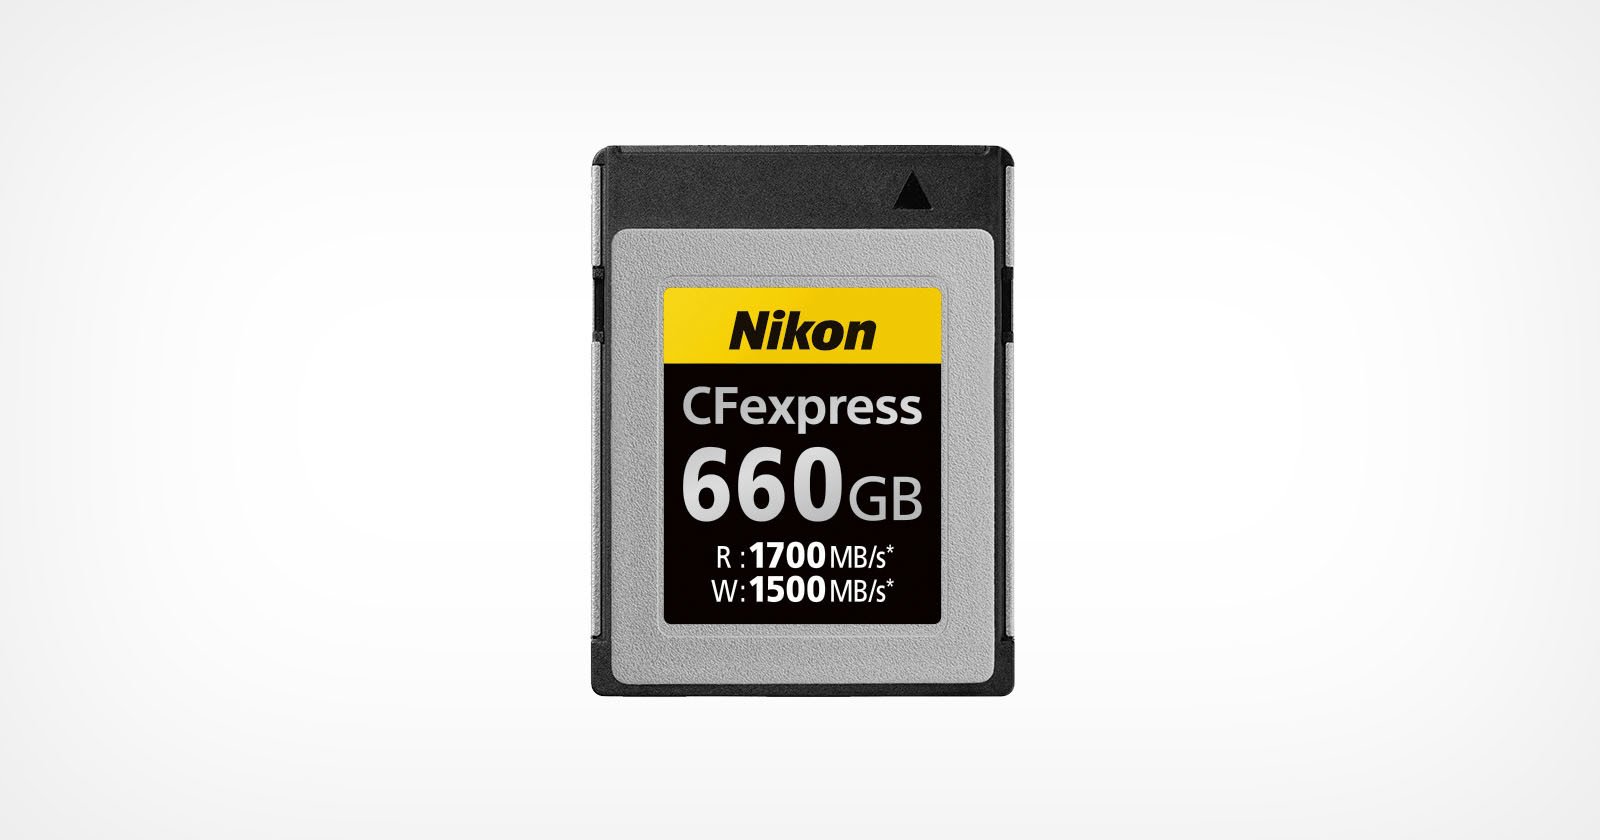 Nikons New 660GB CFexpress Memory Card Costs $727